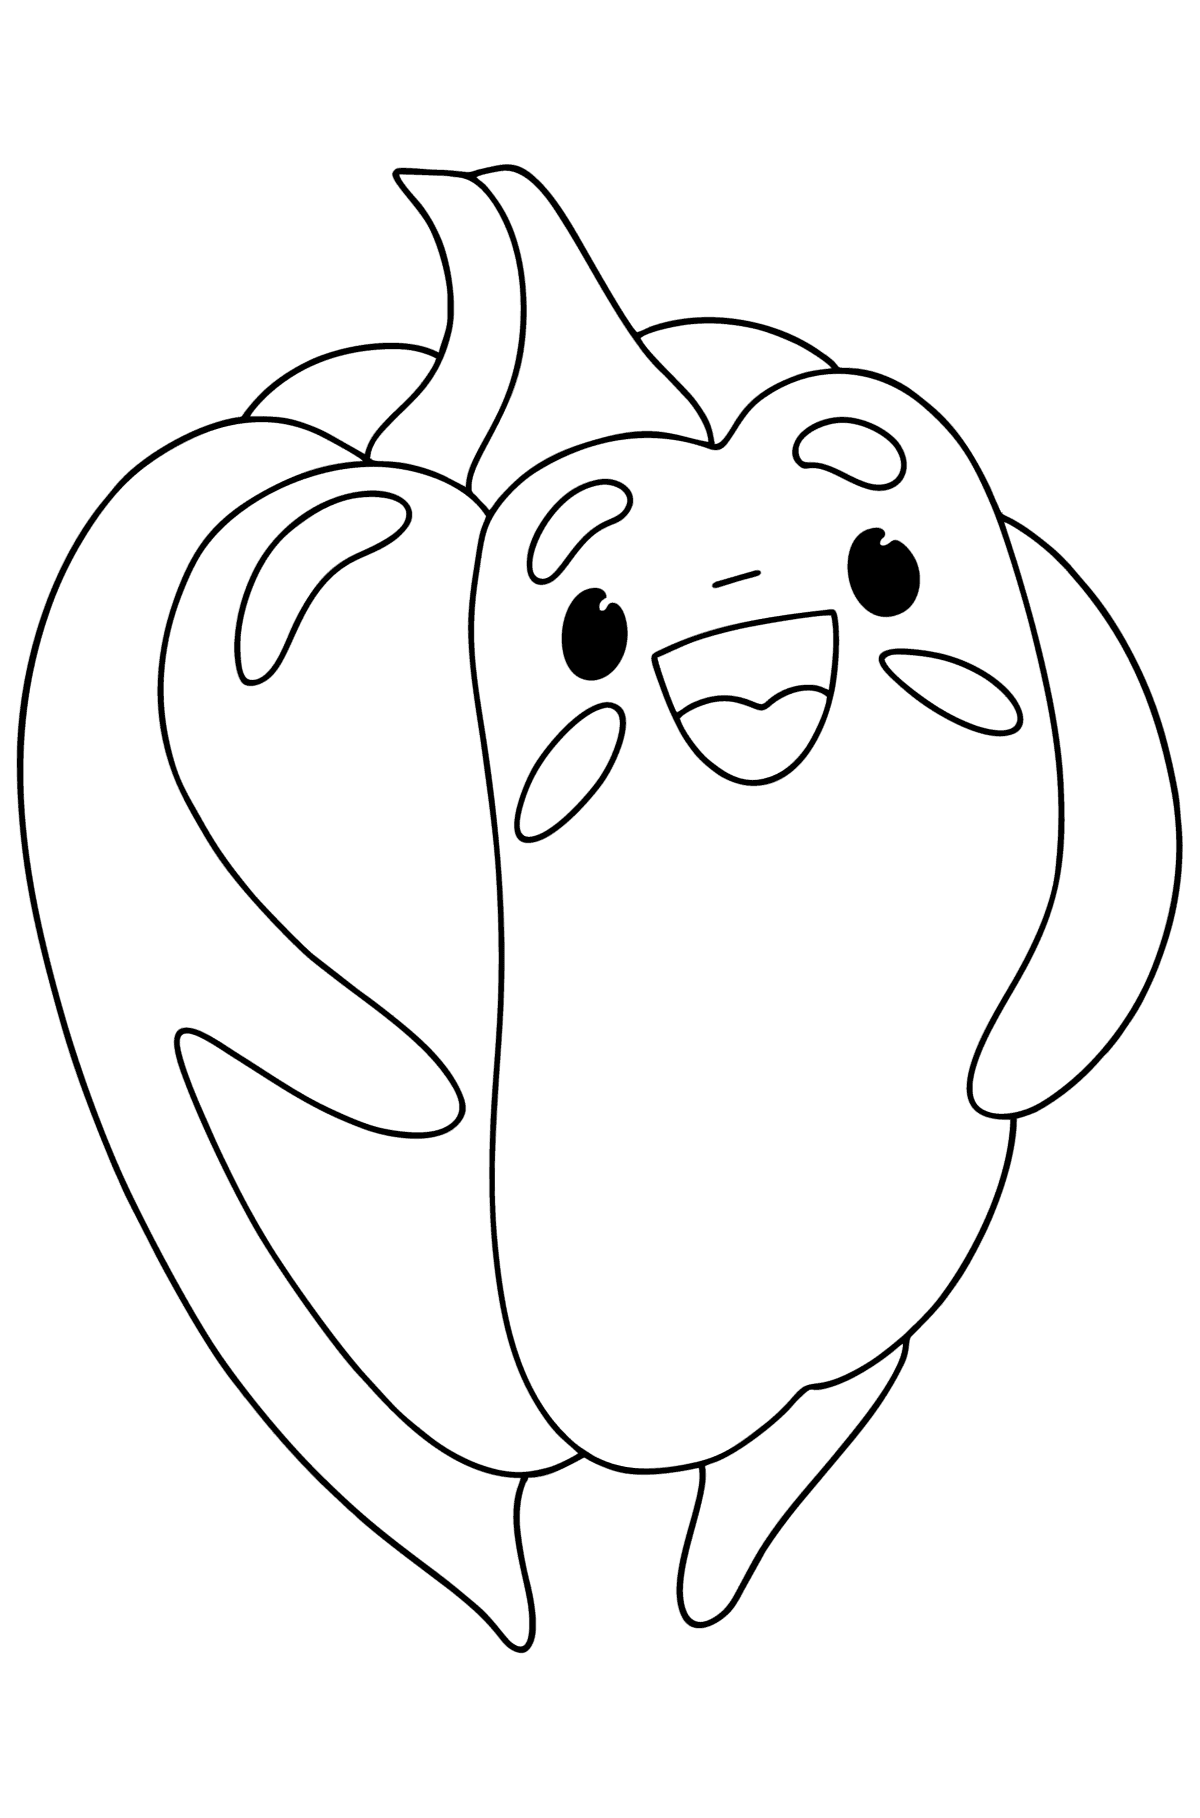 Cartoon pepper сoloring page - Coloring Pages for Kids